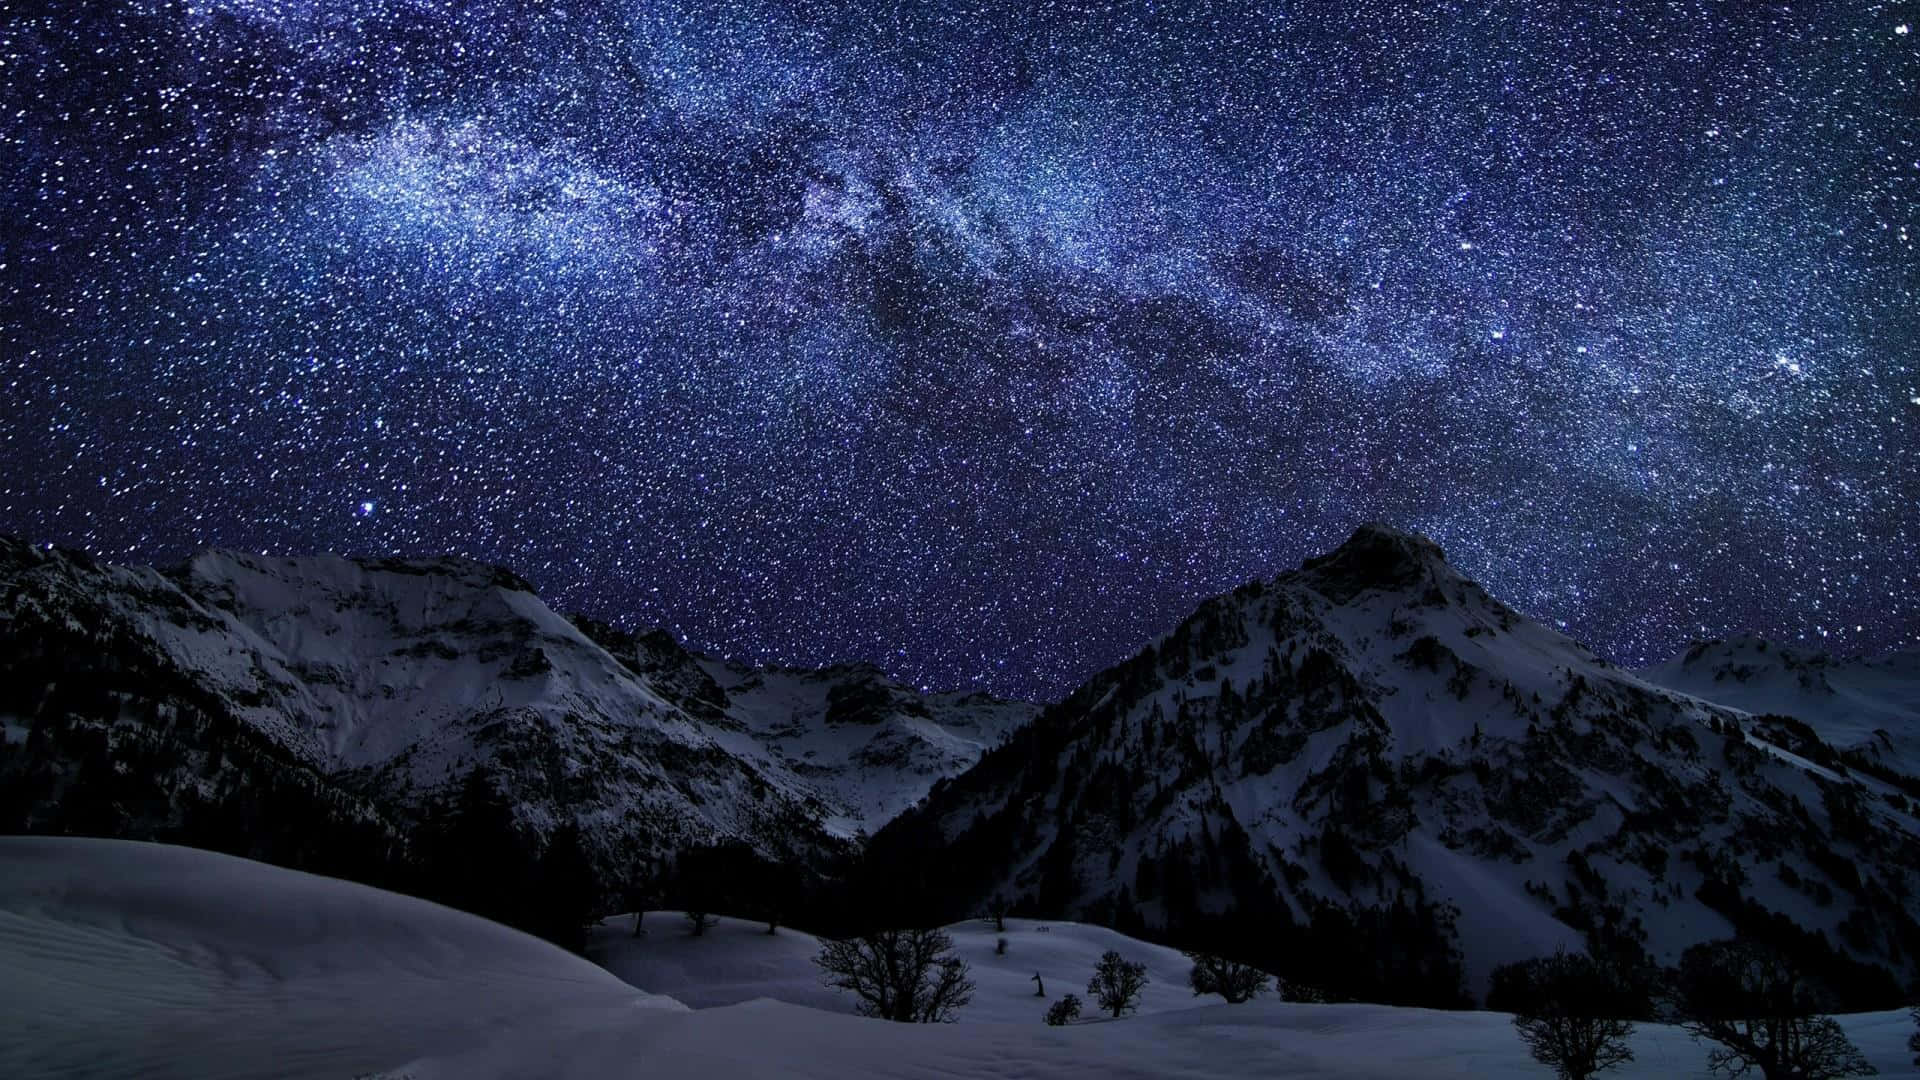 Enjoy the beauty of a snow-covered winter night Wallpaper